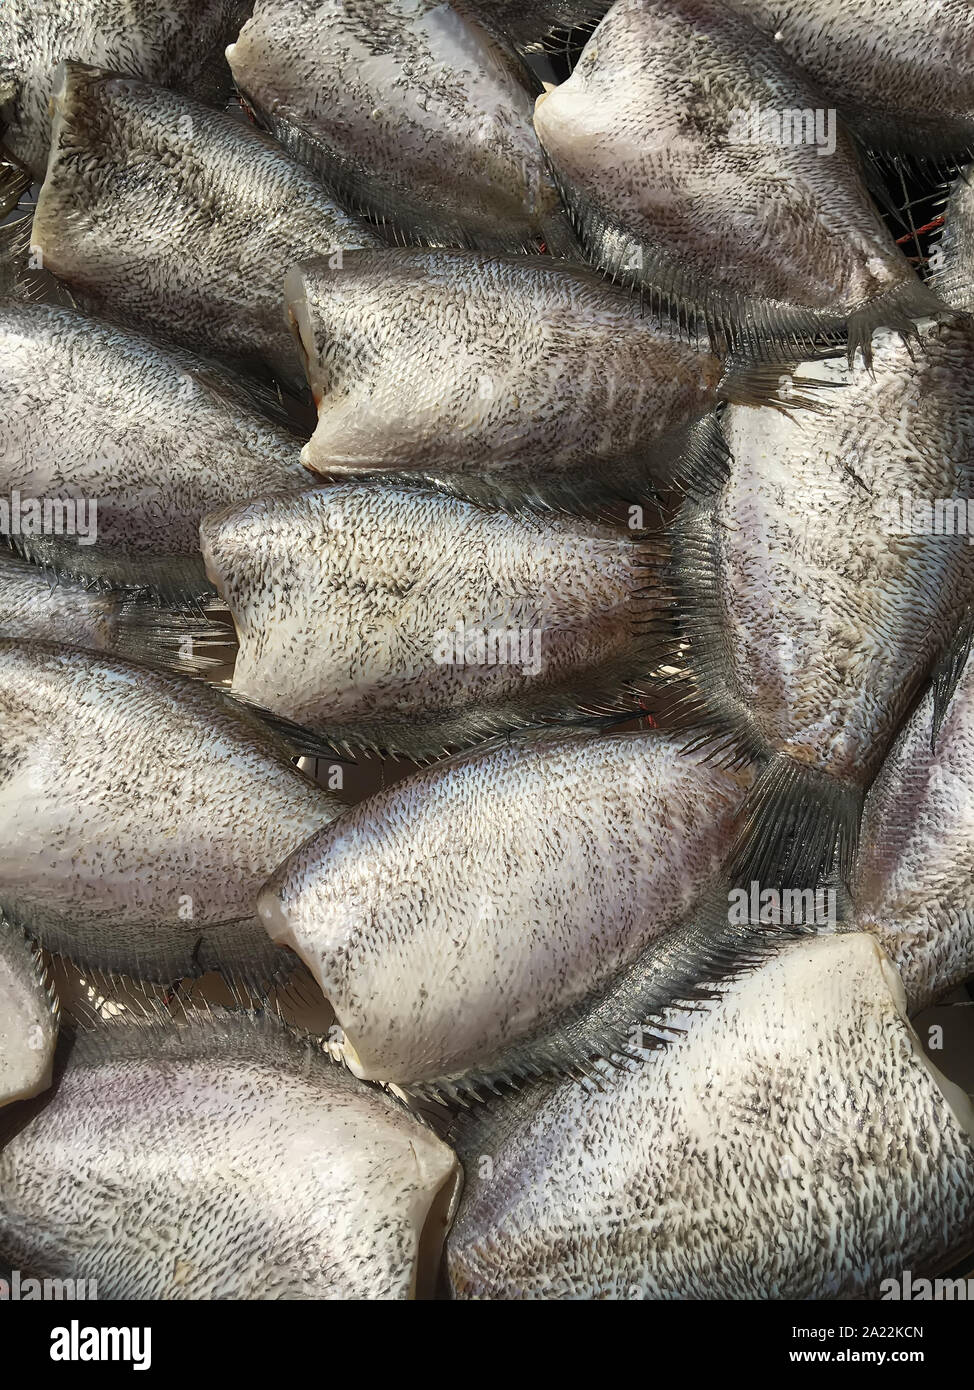 The trichogaster pectoralis fish drying in the sun for sale. Stock Photo